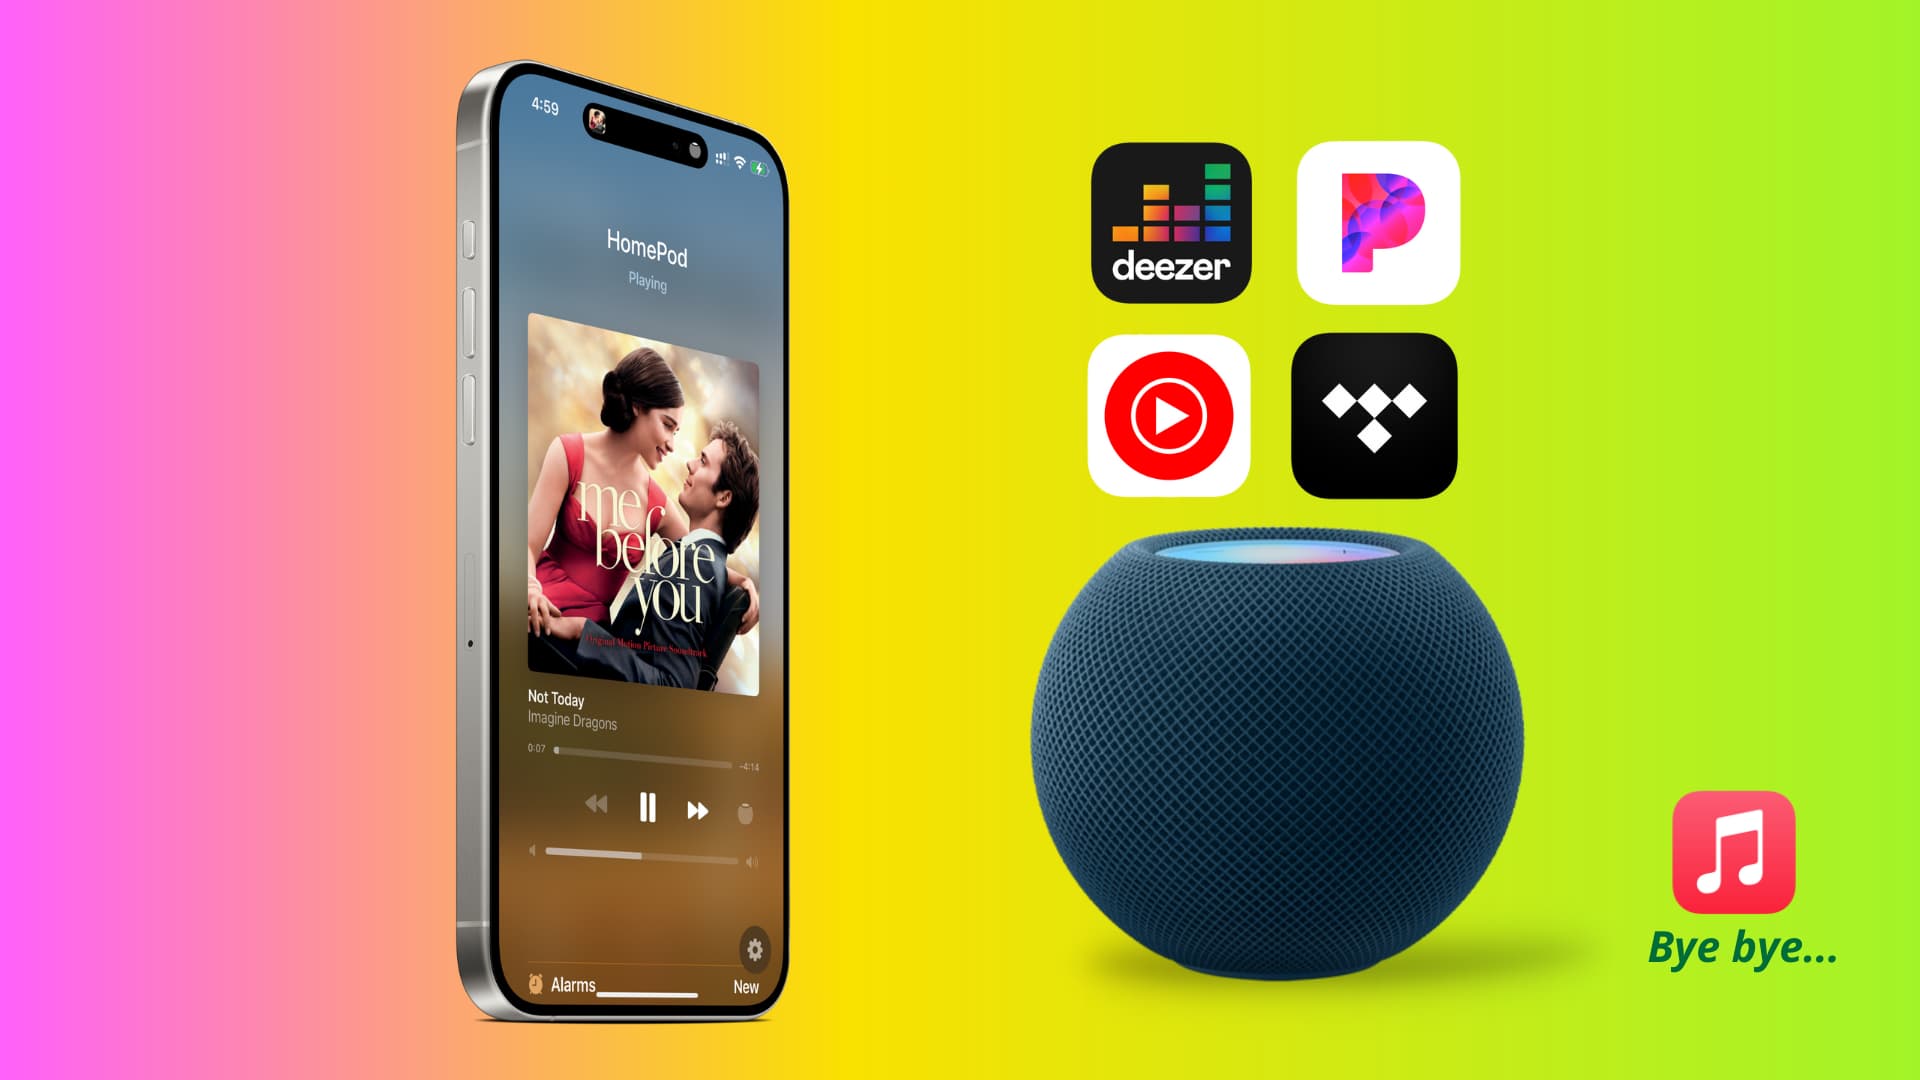 Image composition showing YouTube Music, Pandora, Tidal and Deezer as preferred music app for HomePod